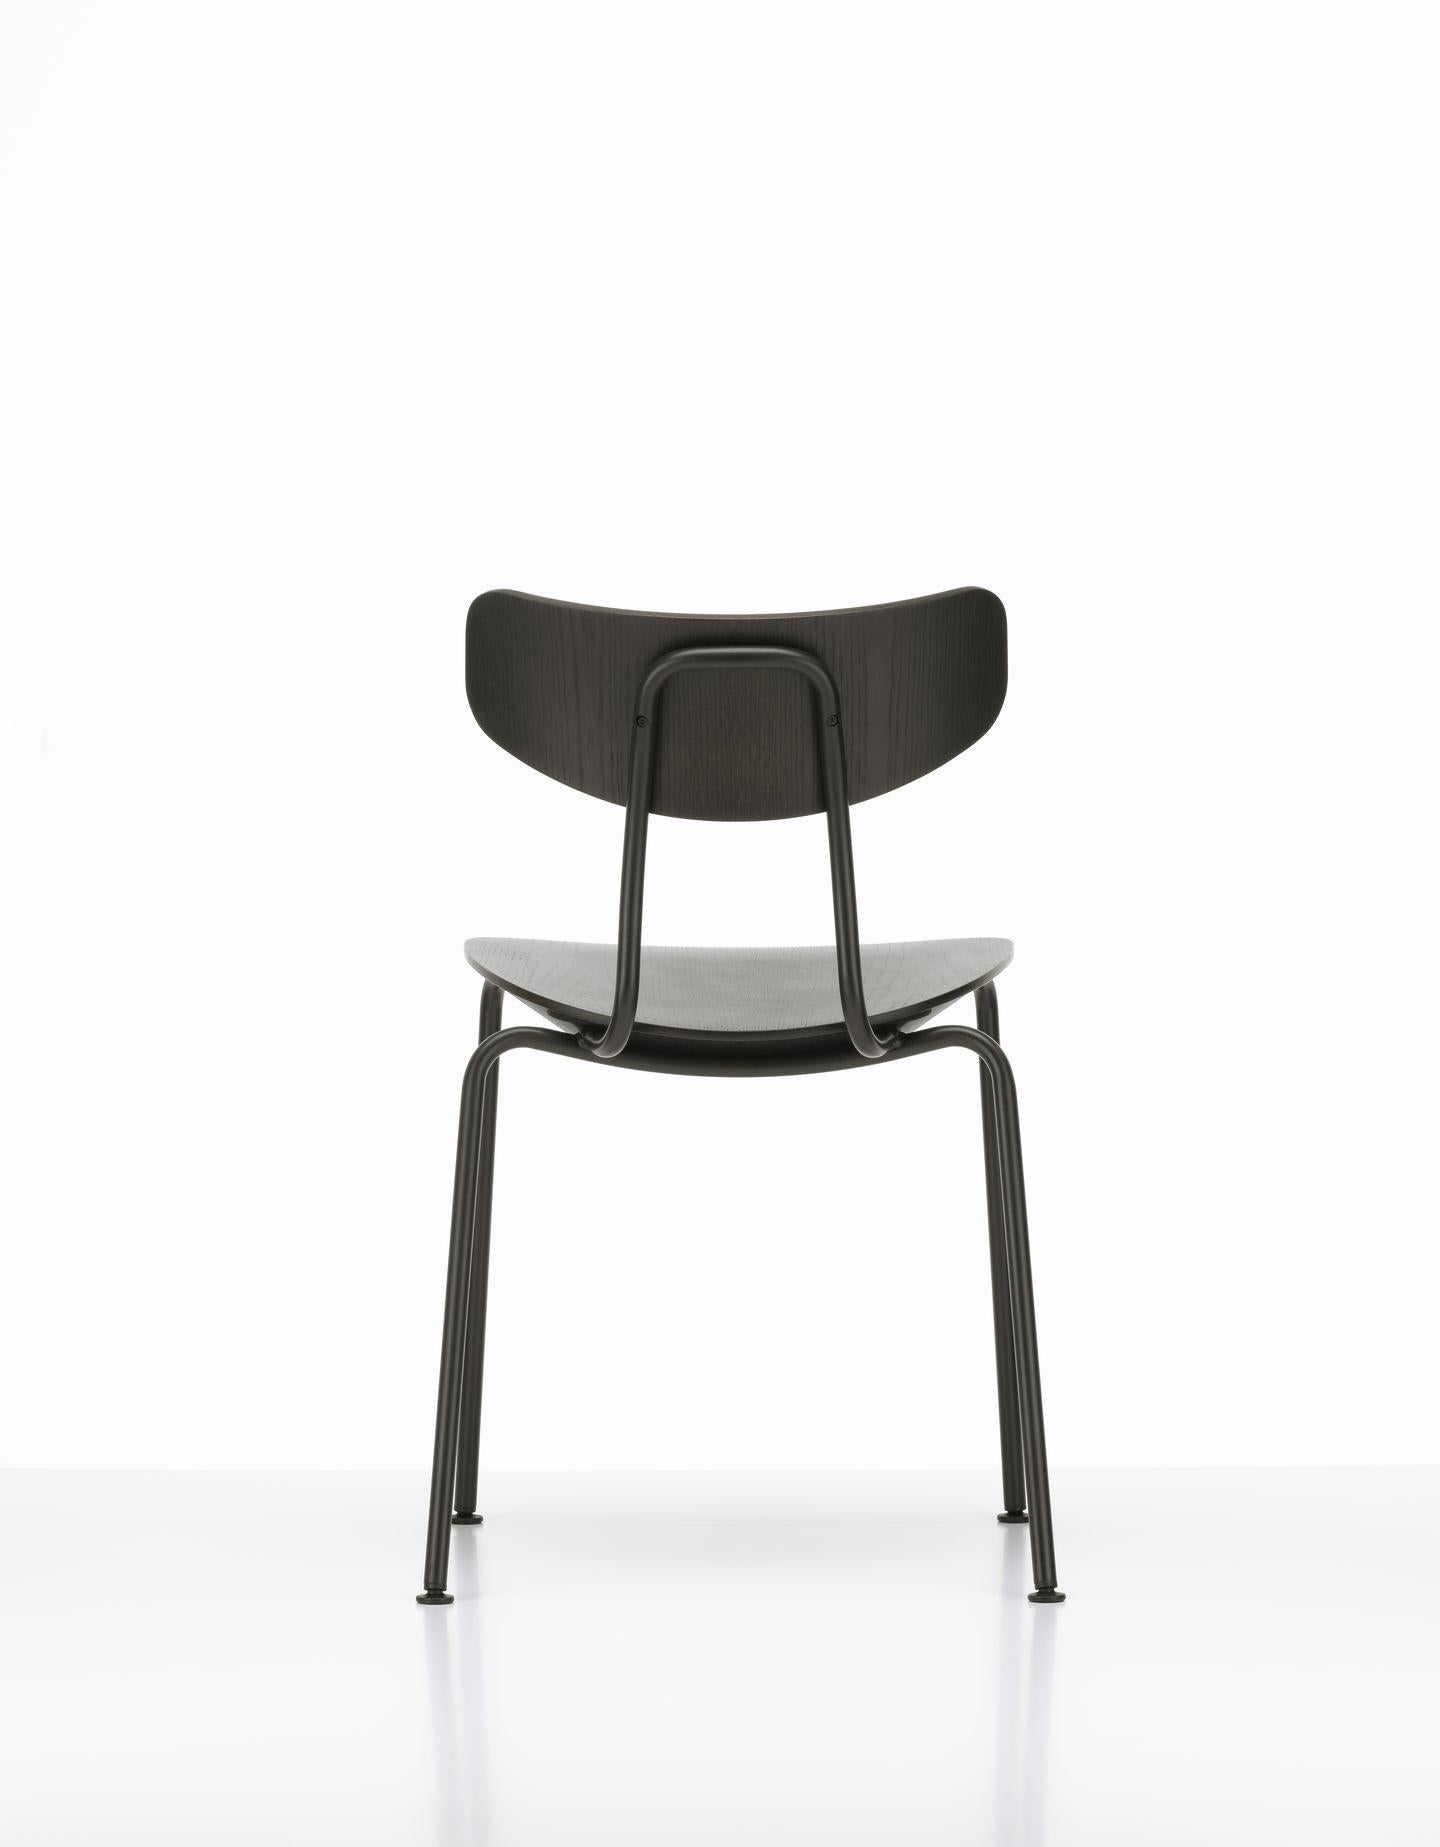 Contemporary Set of Four Moca Chairs in Plywood and Metal Designed by Jasper Morrison